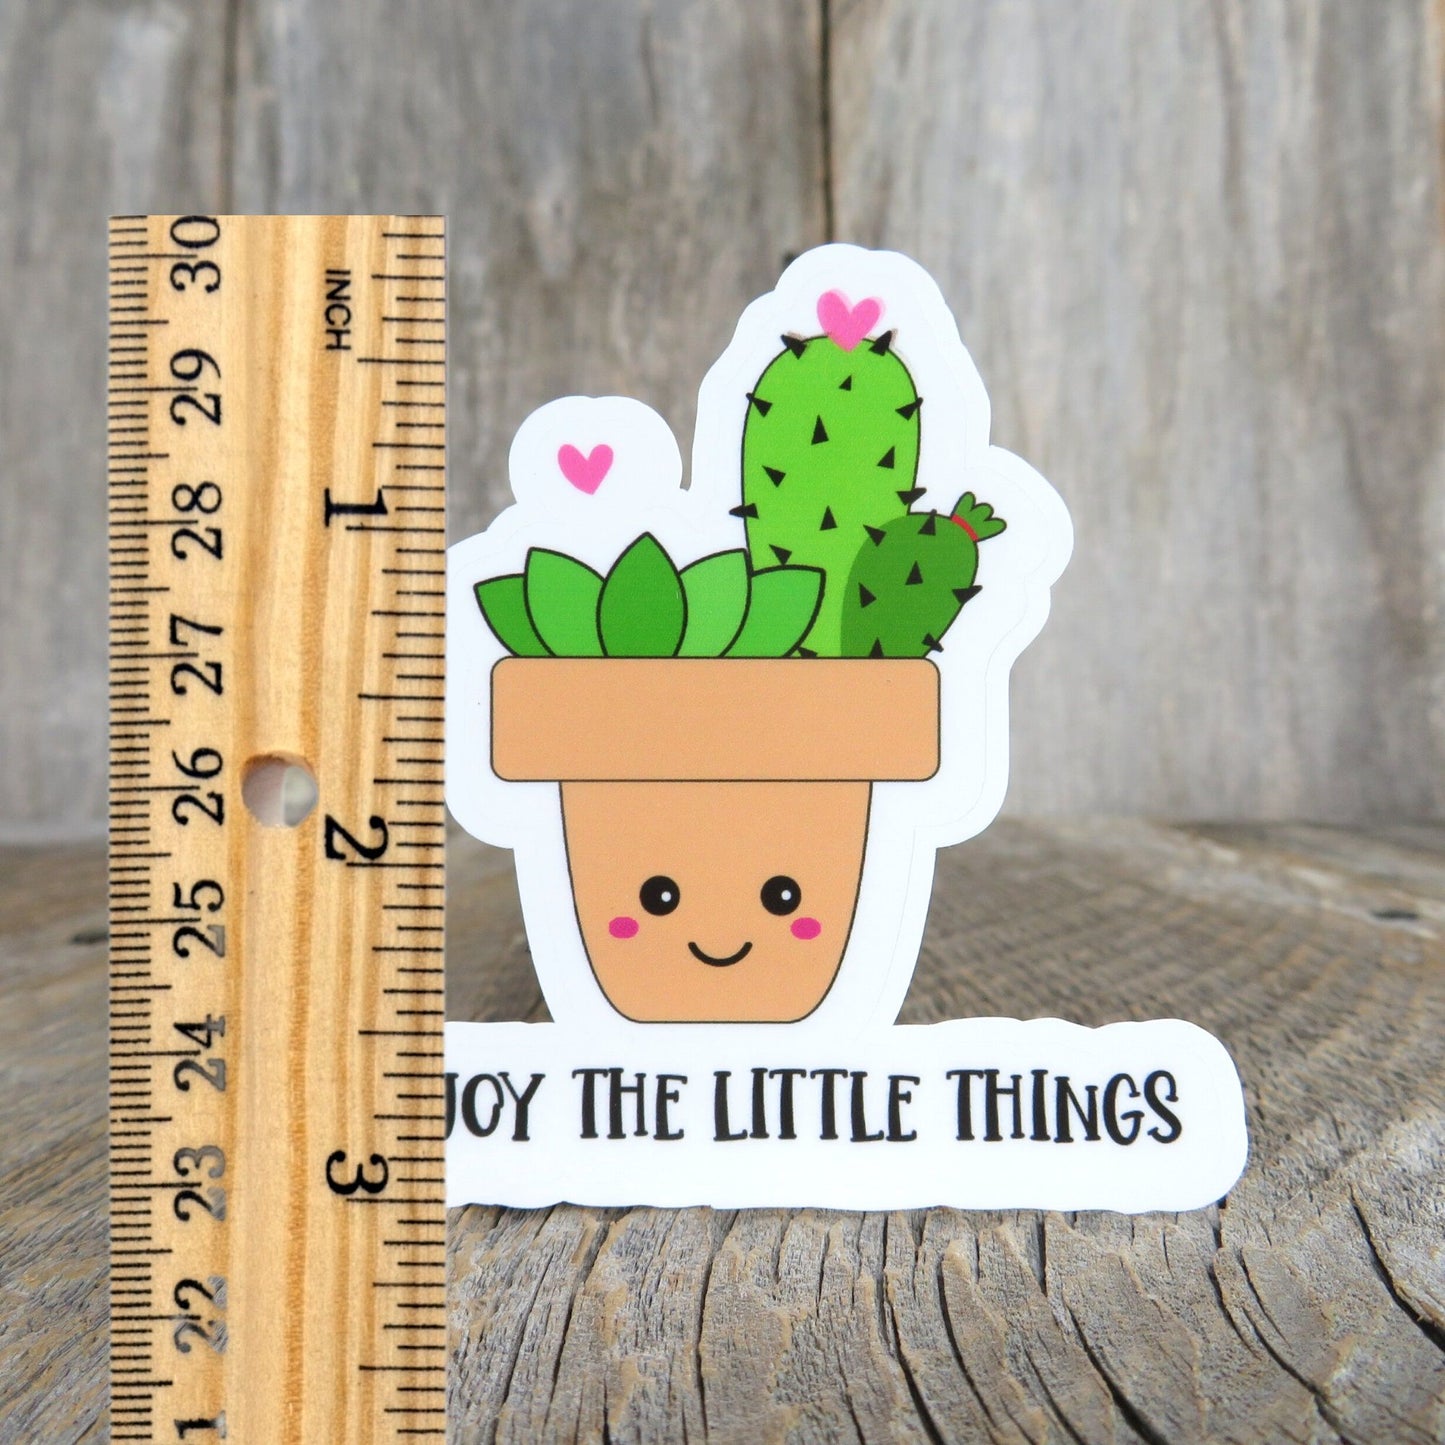 Enjoy the Little Things Sticker Full Color Kawaii Cactus In Pot Waterproof Positive Saying Plant lovers Water Bottle